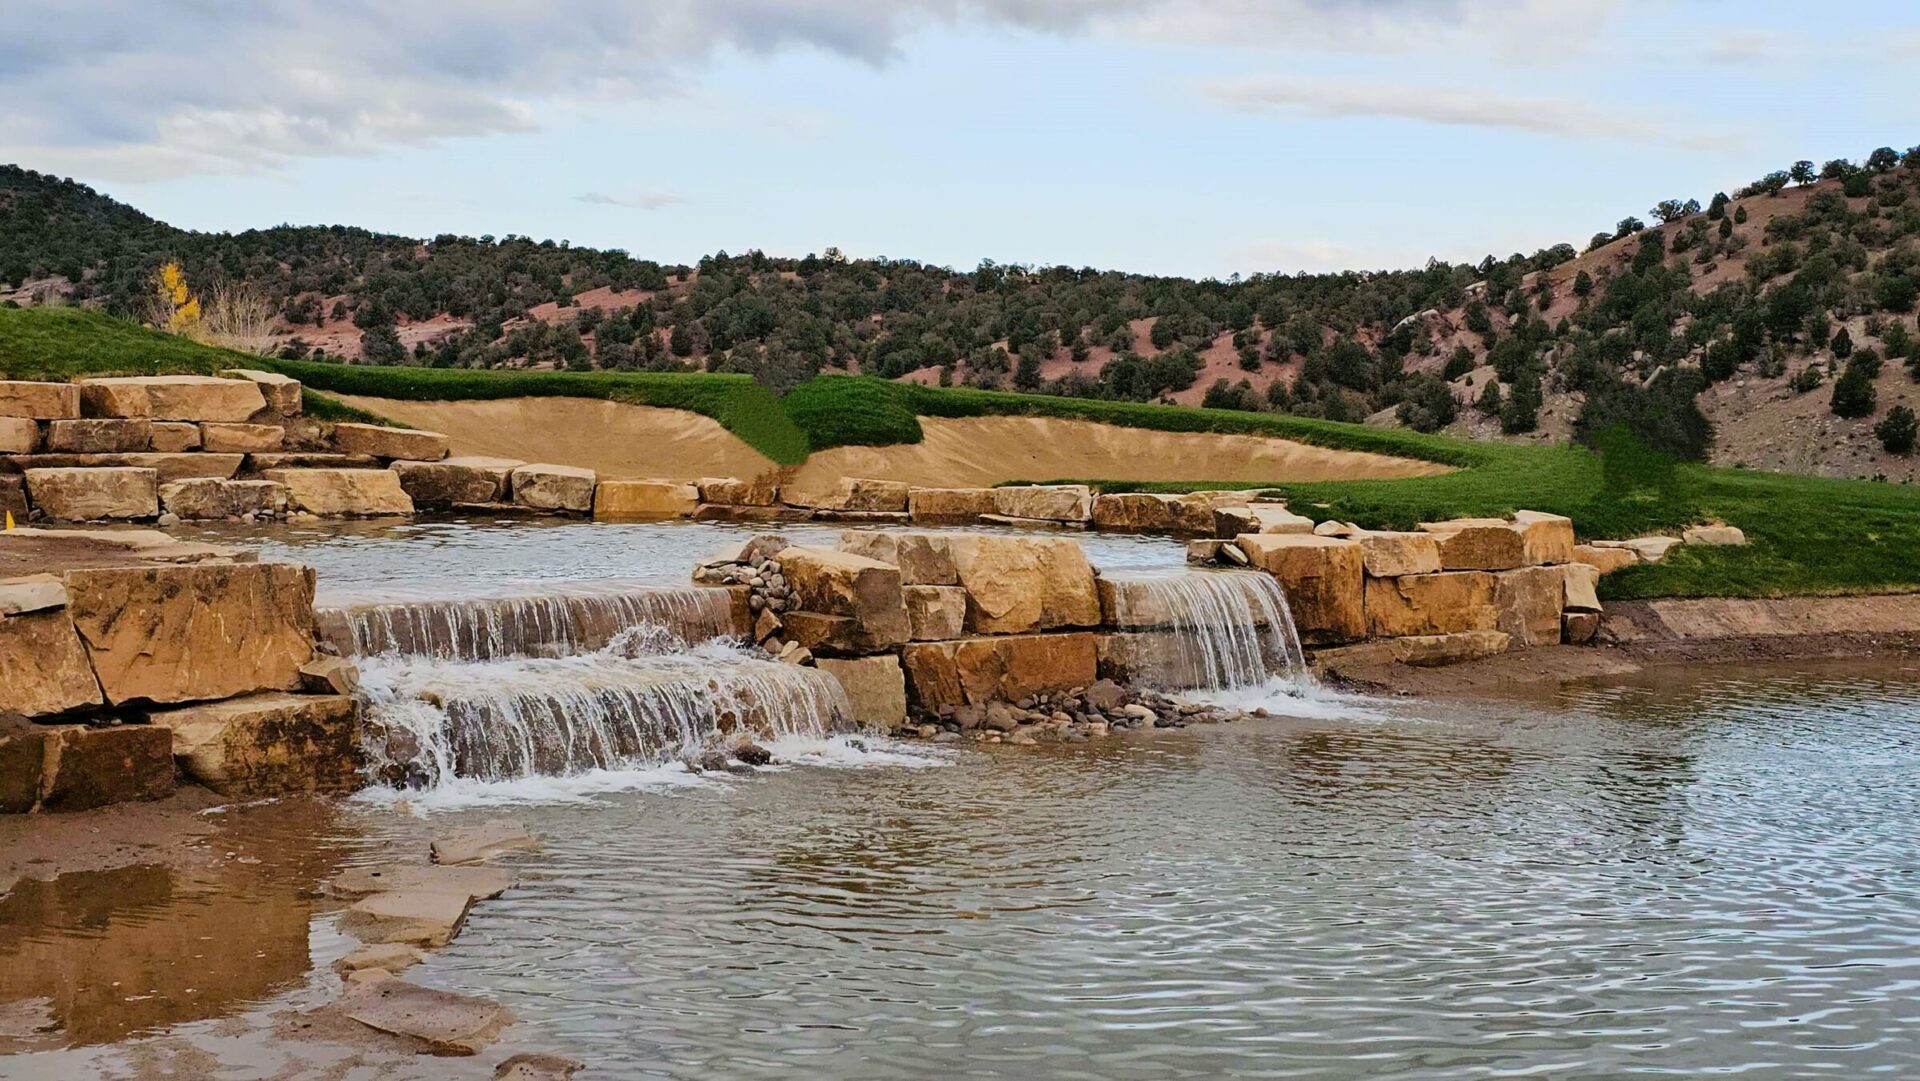 This image shows a serene man-made waterfall cascading down large stone steps into a calm pond, surrounded by landscaped grass and rugged terrain.